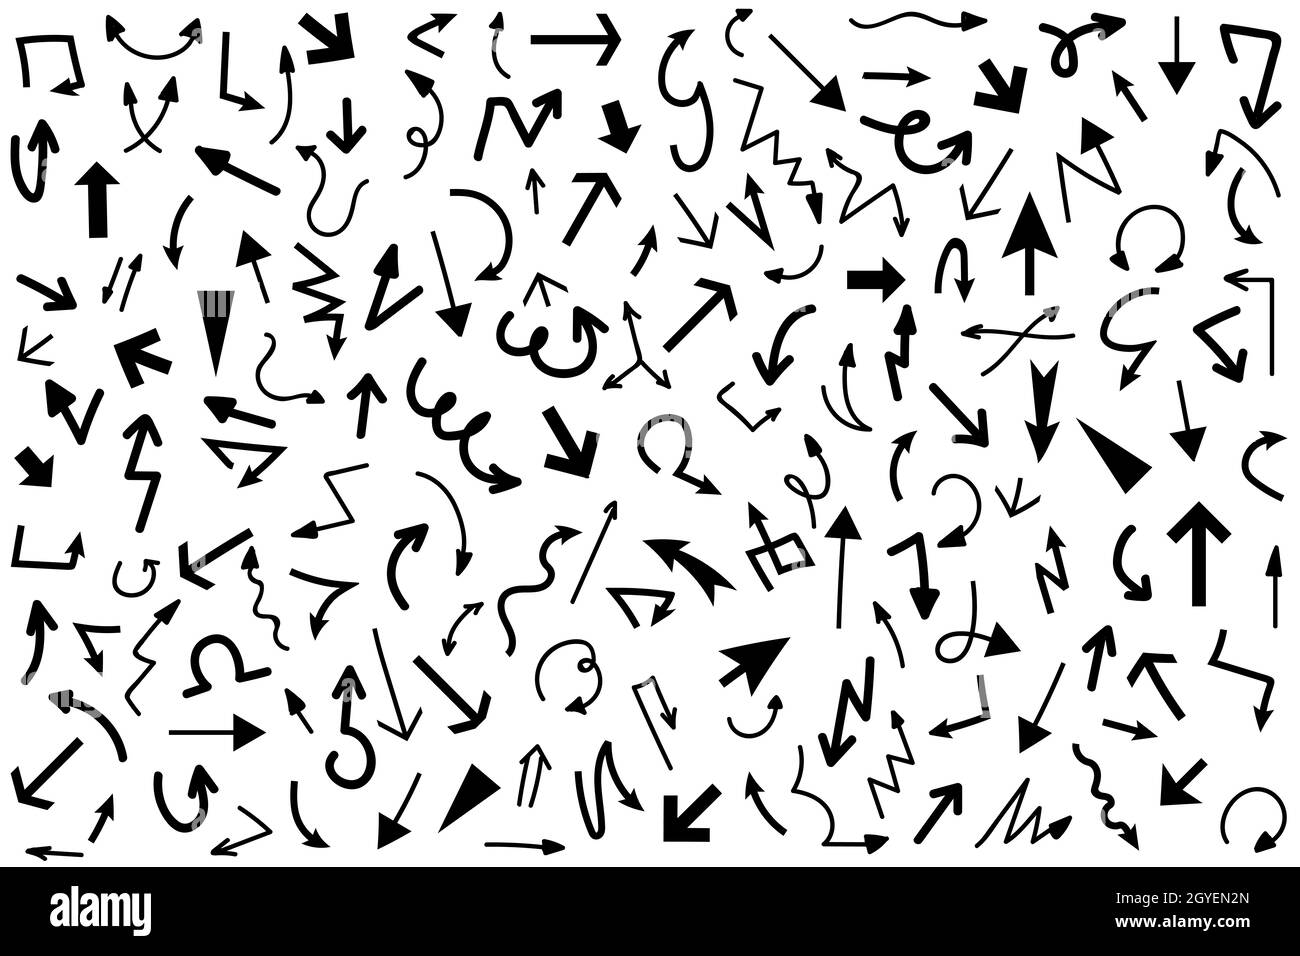 Arrows doodle set. Big collection of different shape round twisted arrowhead computer cursors pointers on white background. Navigation symbol vector a Stock Photo